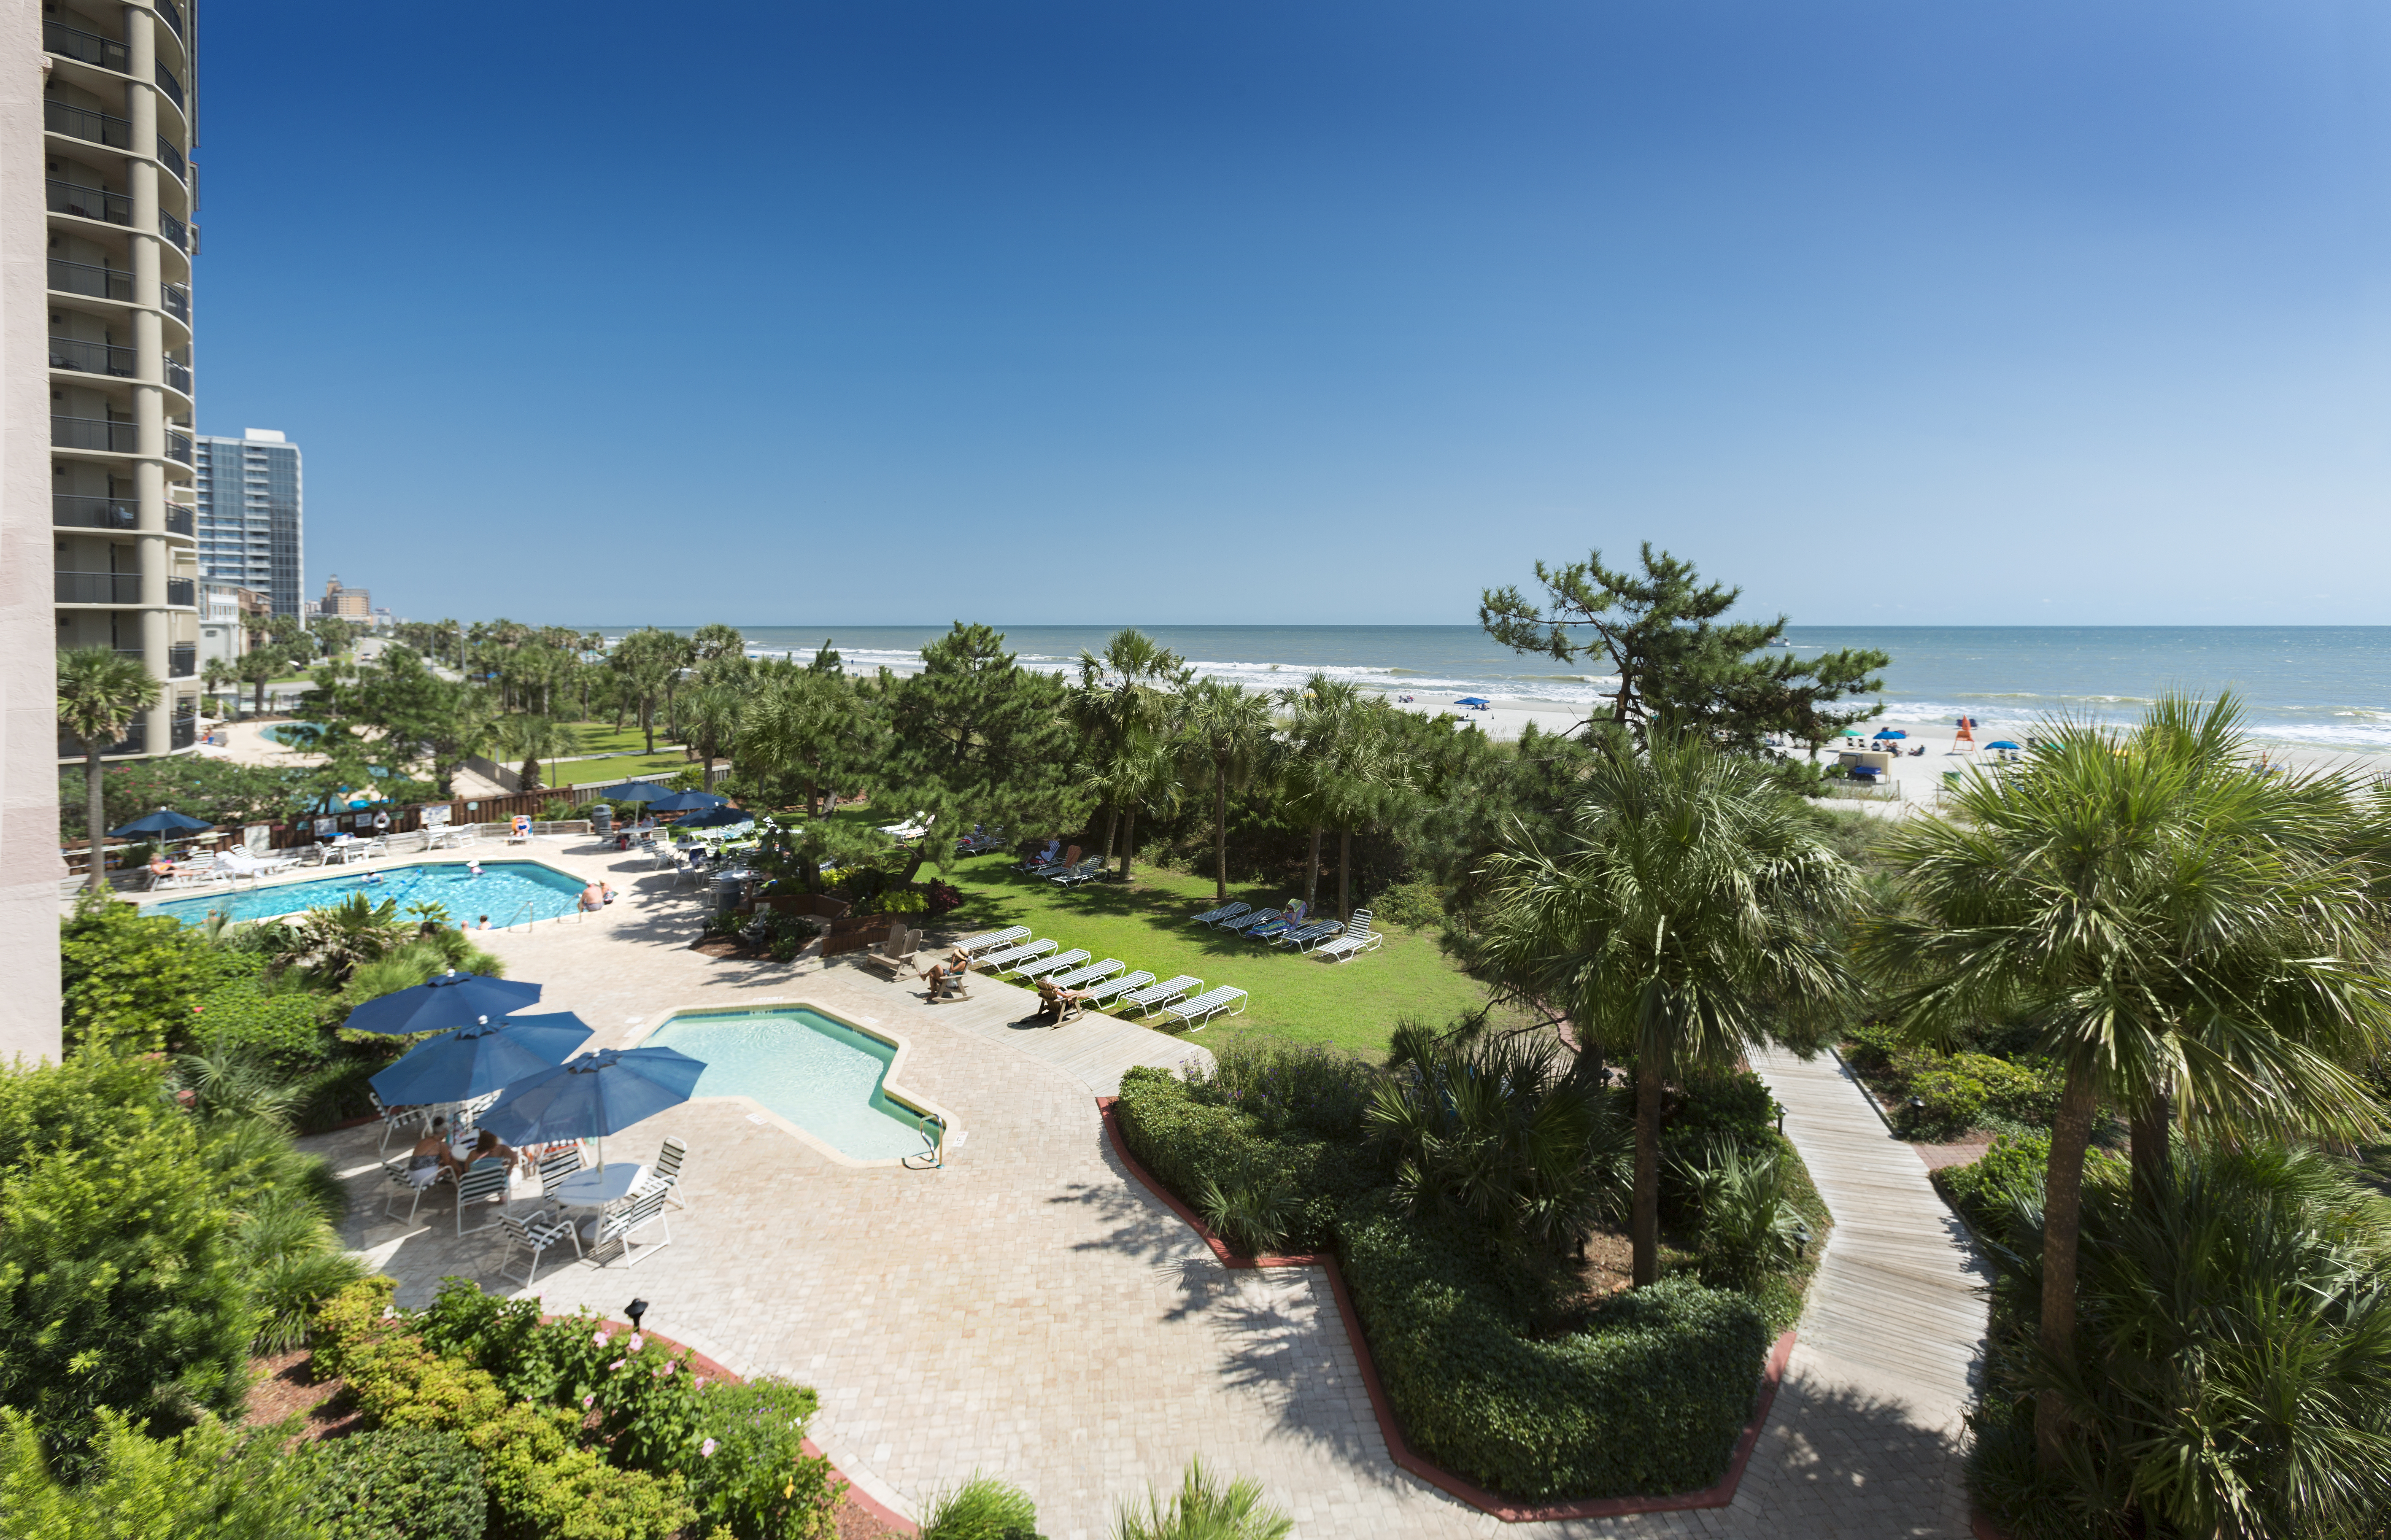 beach colony resort's oceanfront lawn and pool deck